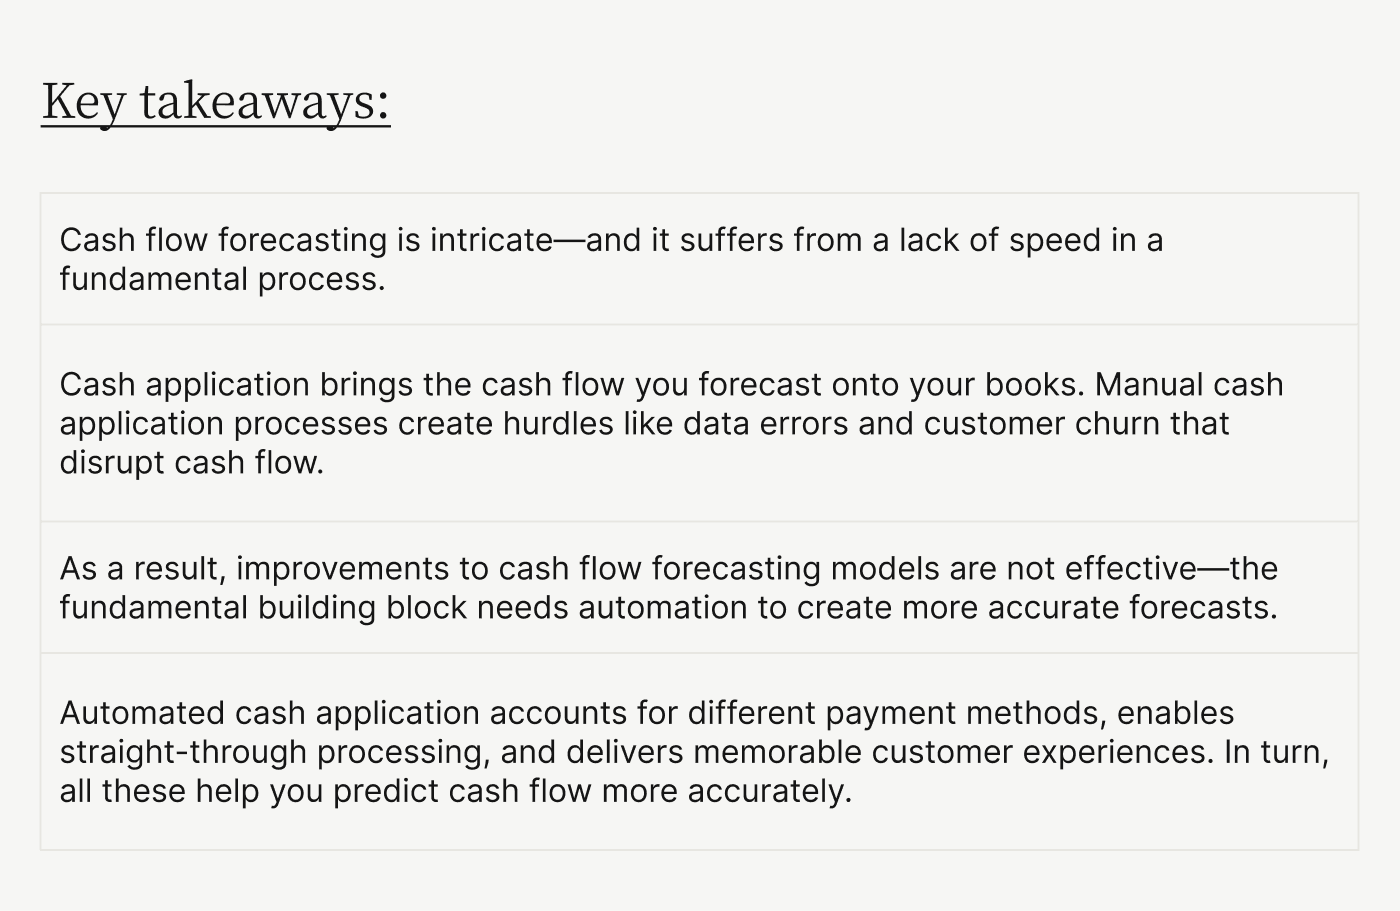 Key takeaways: why automating cash application is your key to accurate cash flow forecasting